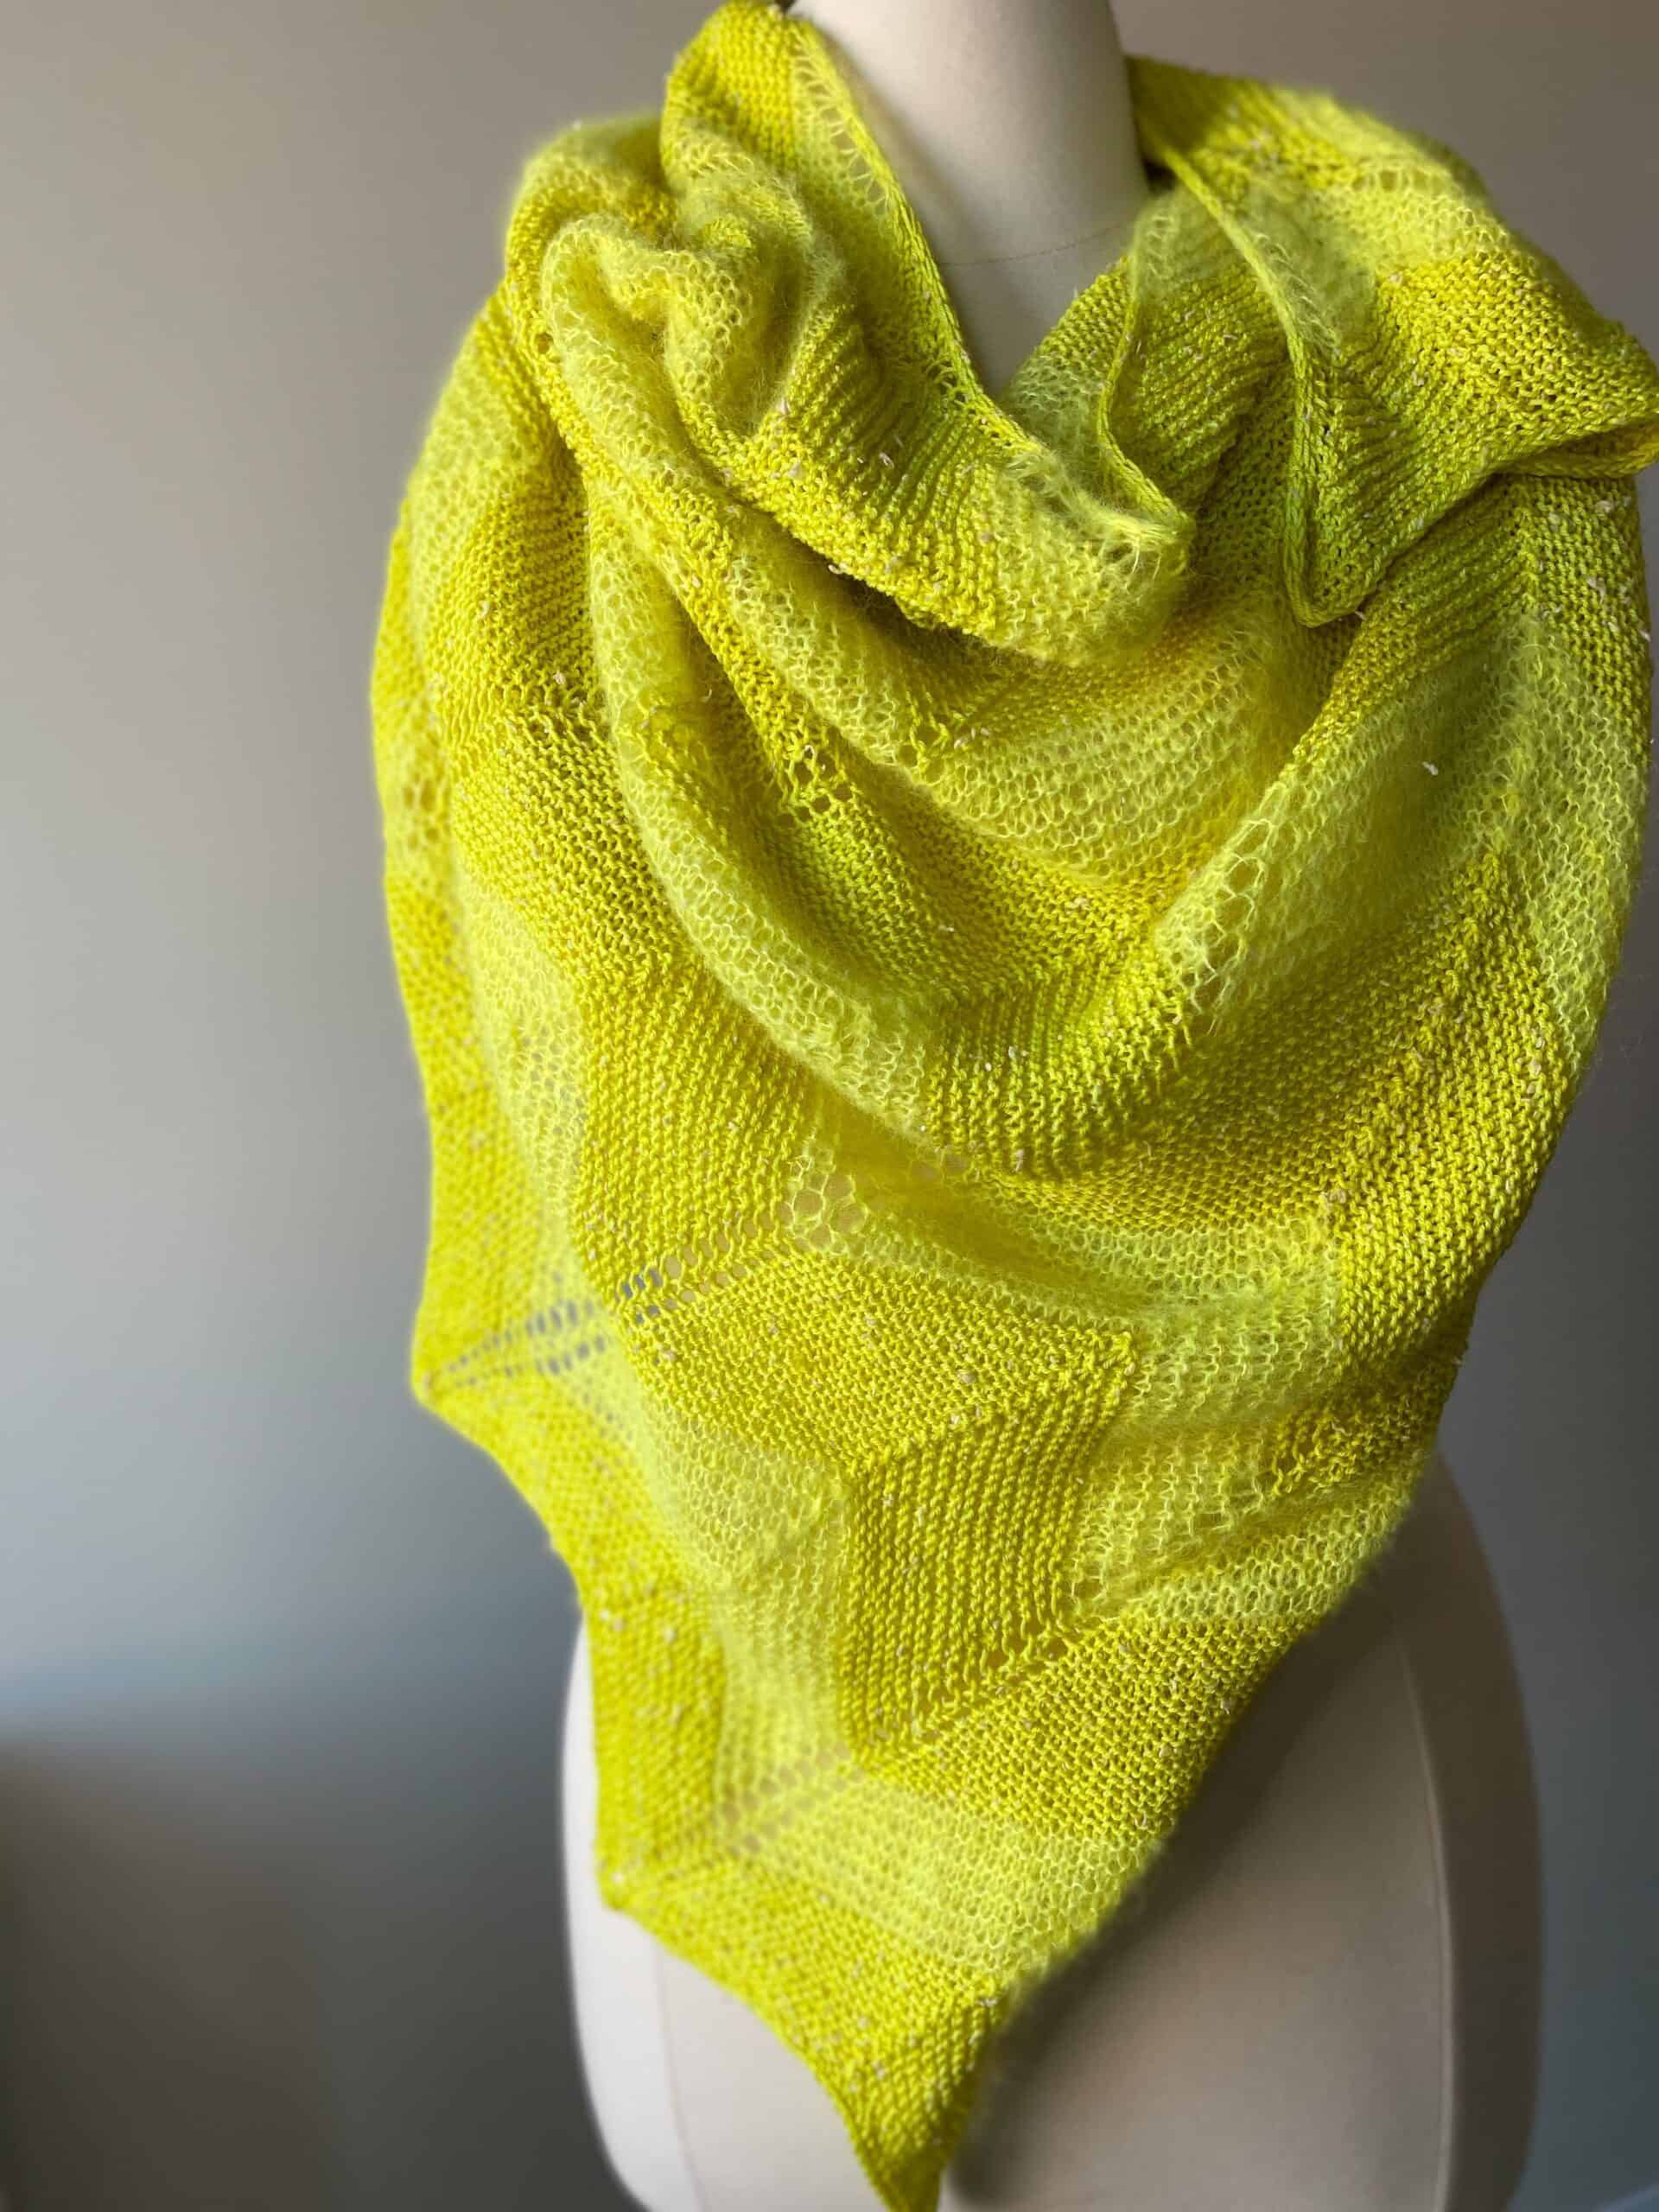 Bright lemon yellow shawl draped around mannequin showing off garter and chevron stitches with fingering and suri yarn.